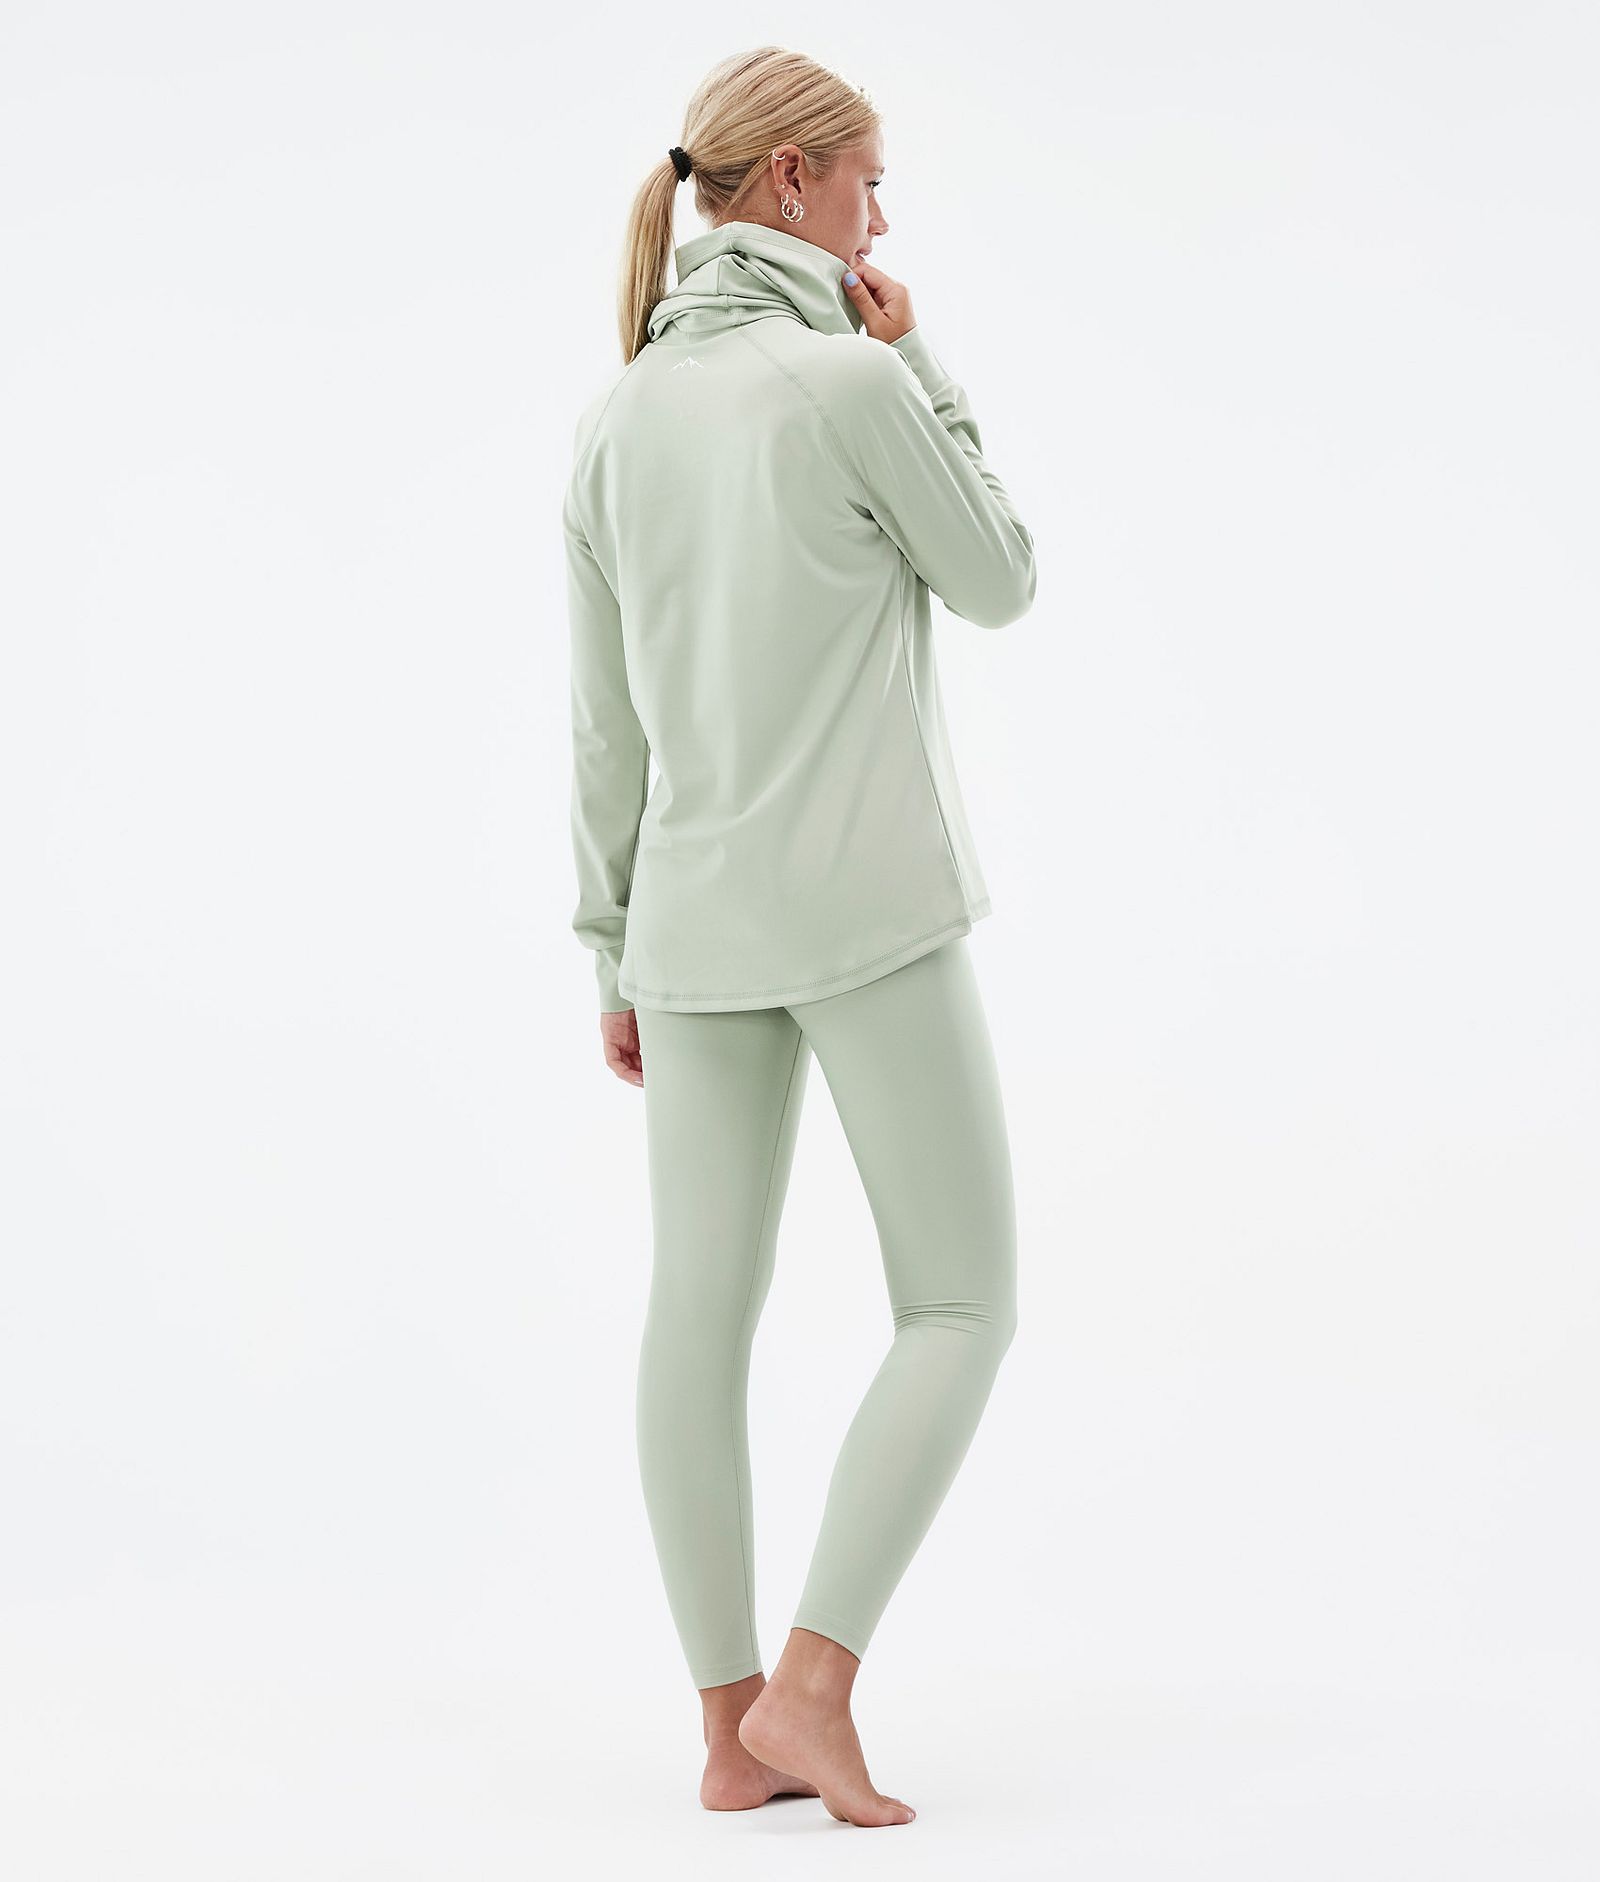 Snuggle W 2022 Base Layer Top Women 2X-Up Soft Green, Image 5 of 6